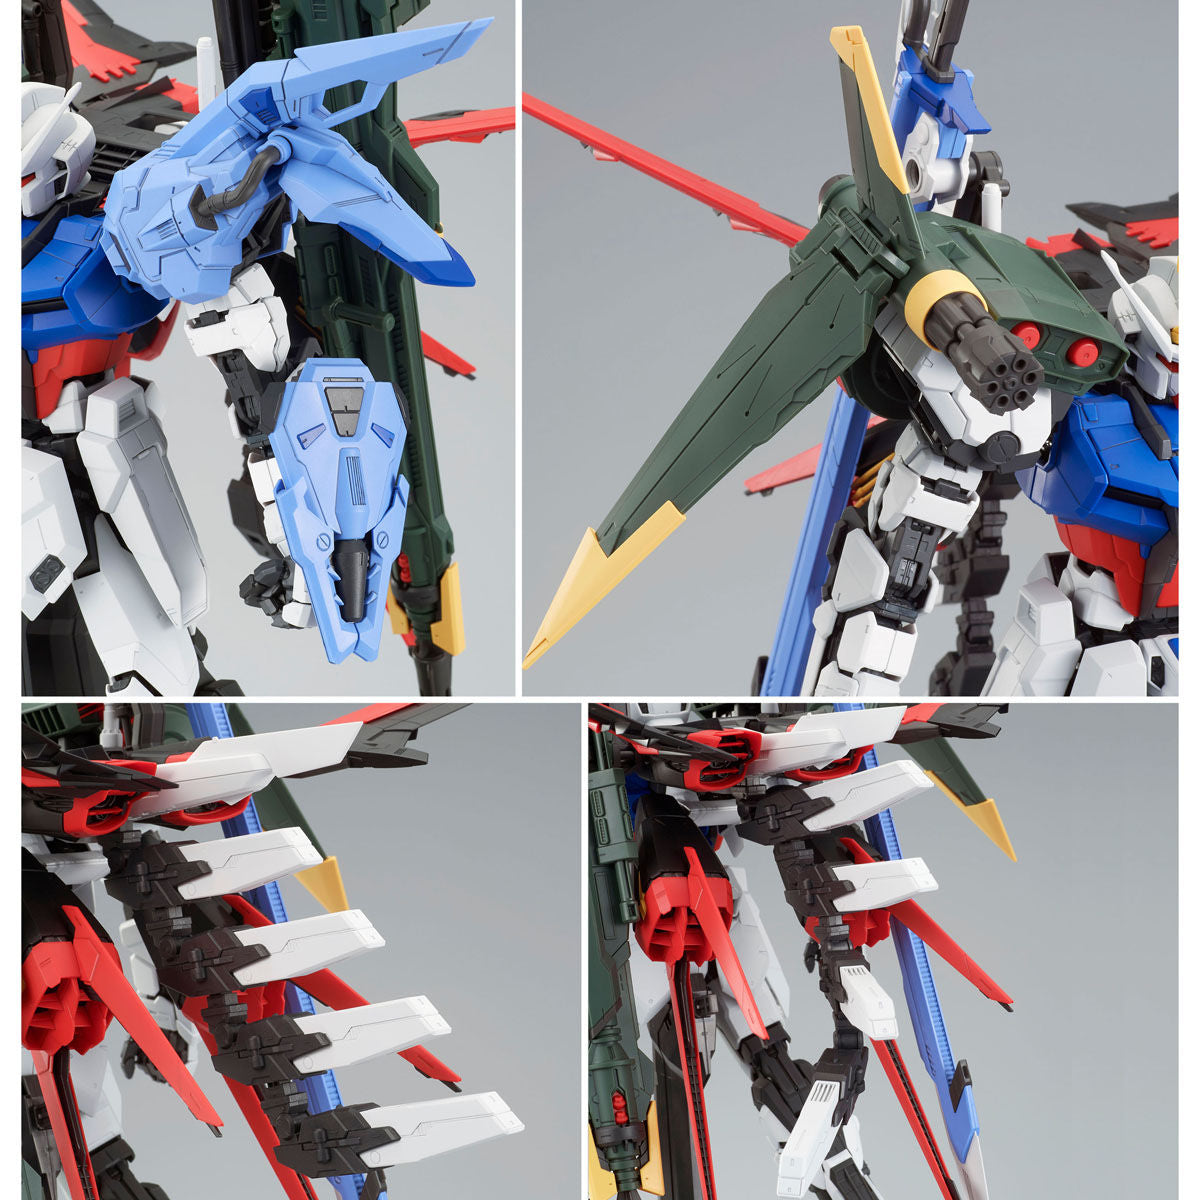 P-BANDAI: PG 1/60 PERFECT STRIKE GUNDAM EXPANSION EQUIPMENT SET **PARTS ONLY**  [End of JUNE 2020]